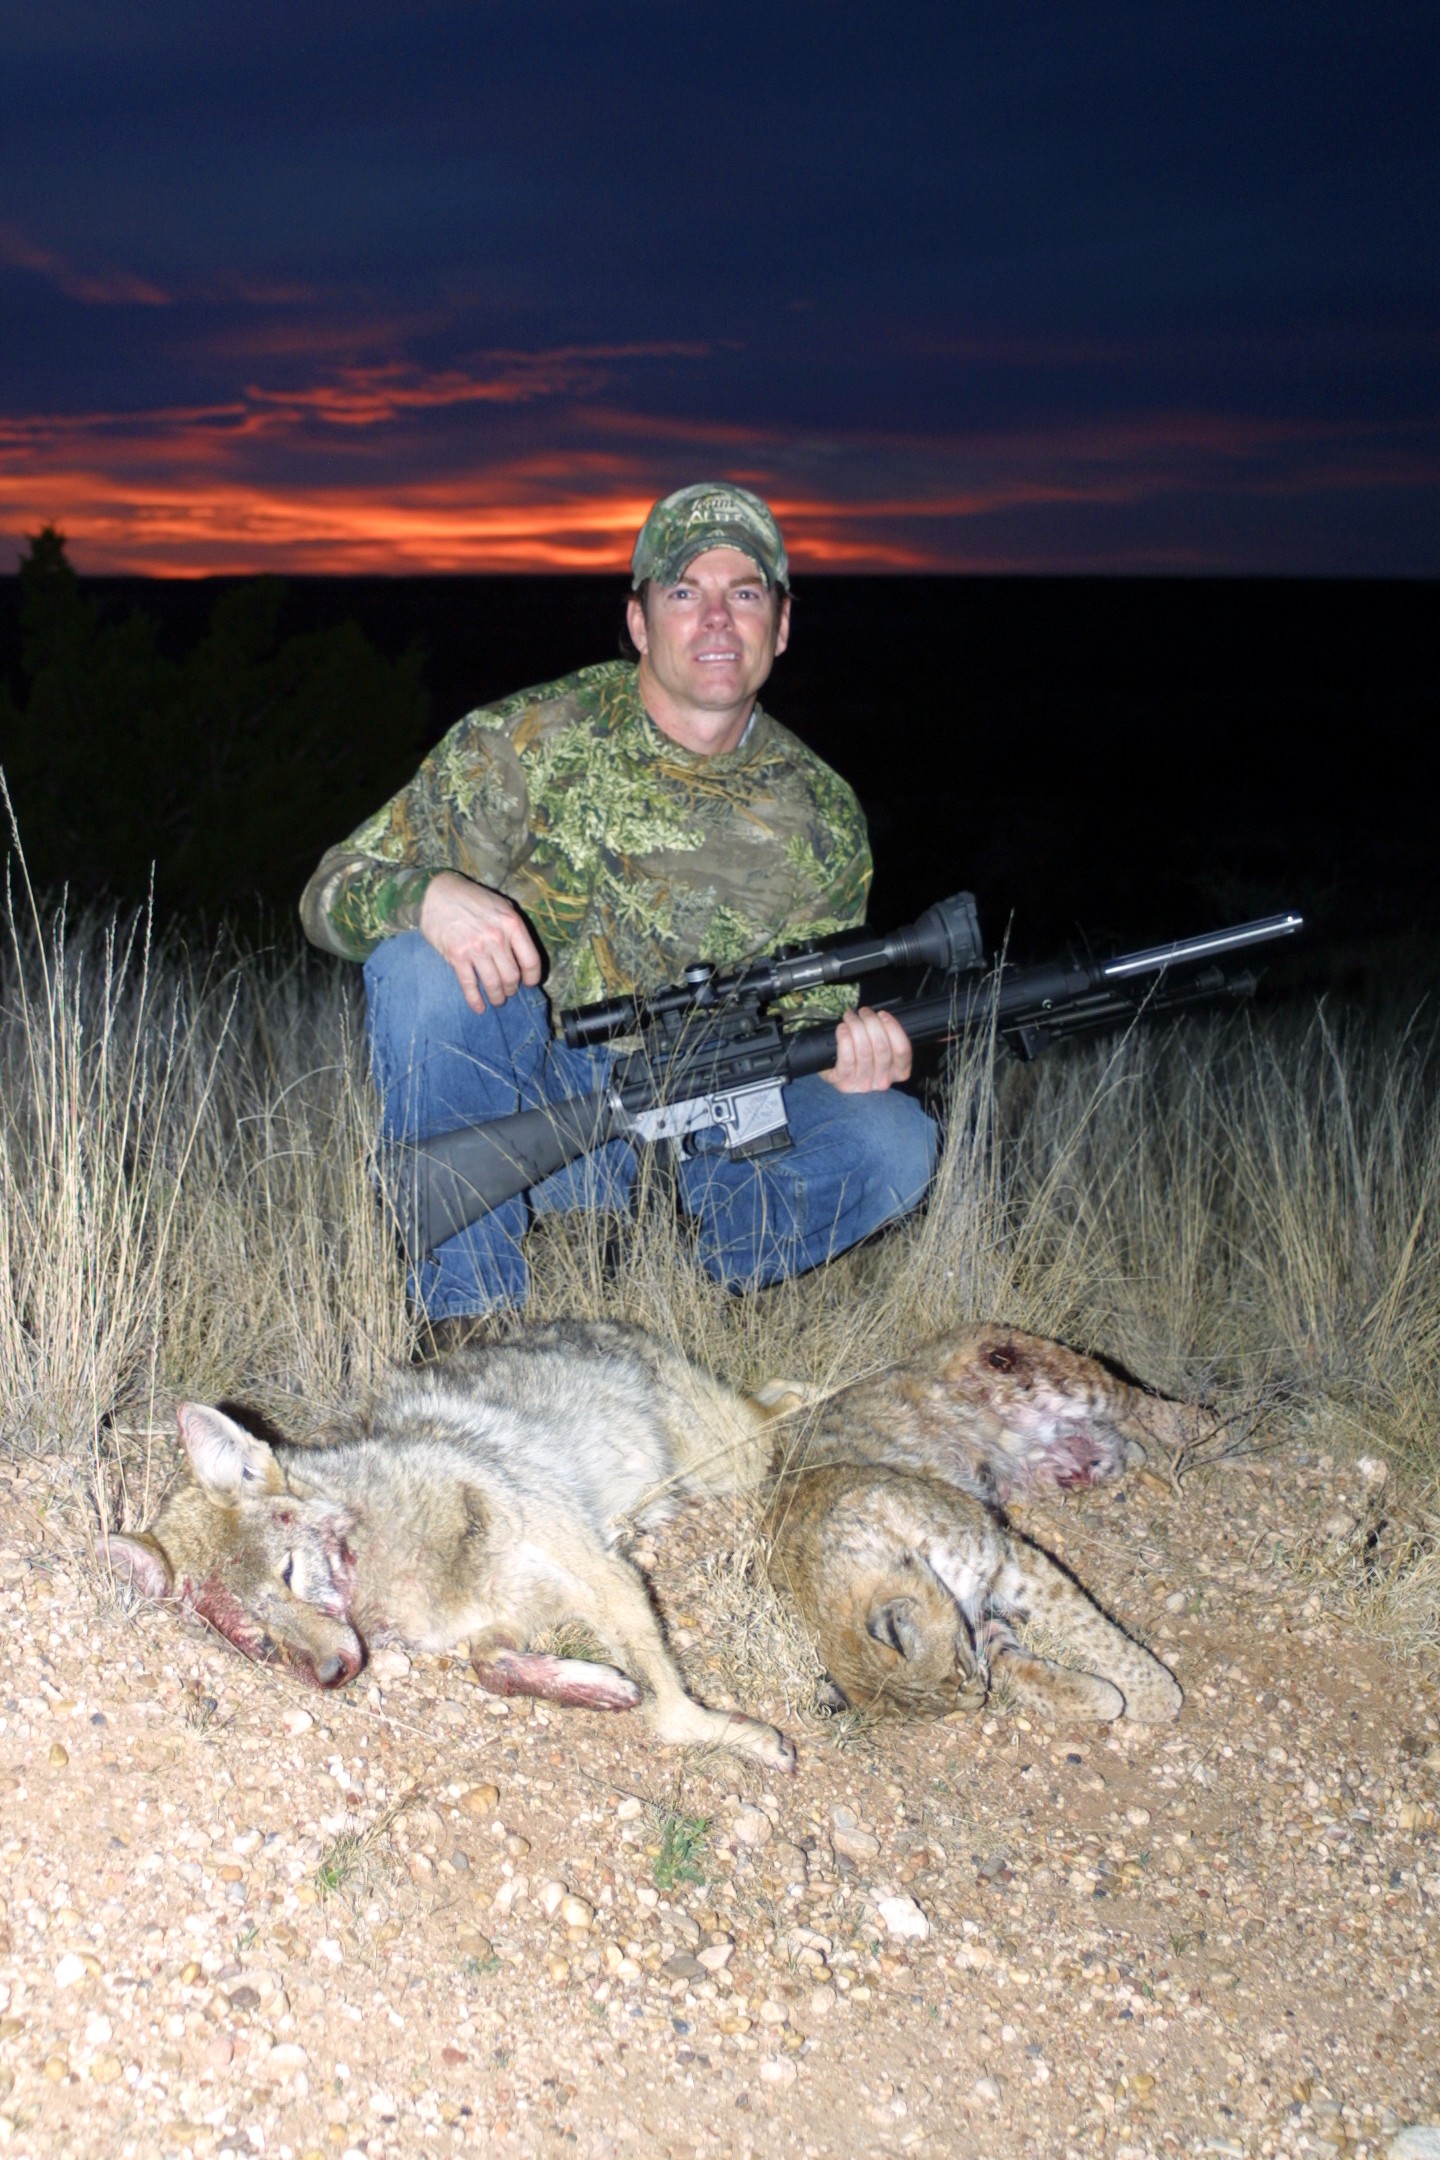 Is Coyote Control the Answer for Better Deer Hunting?